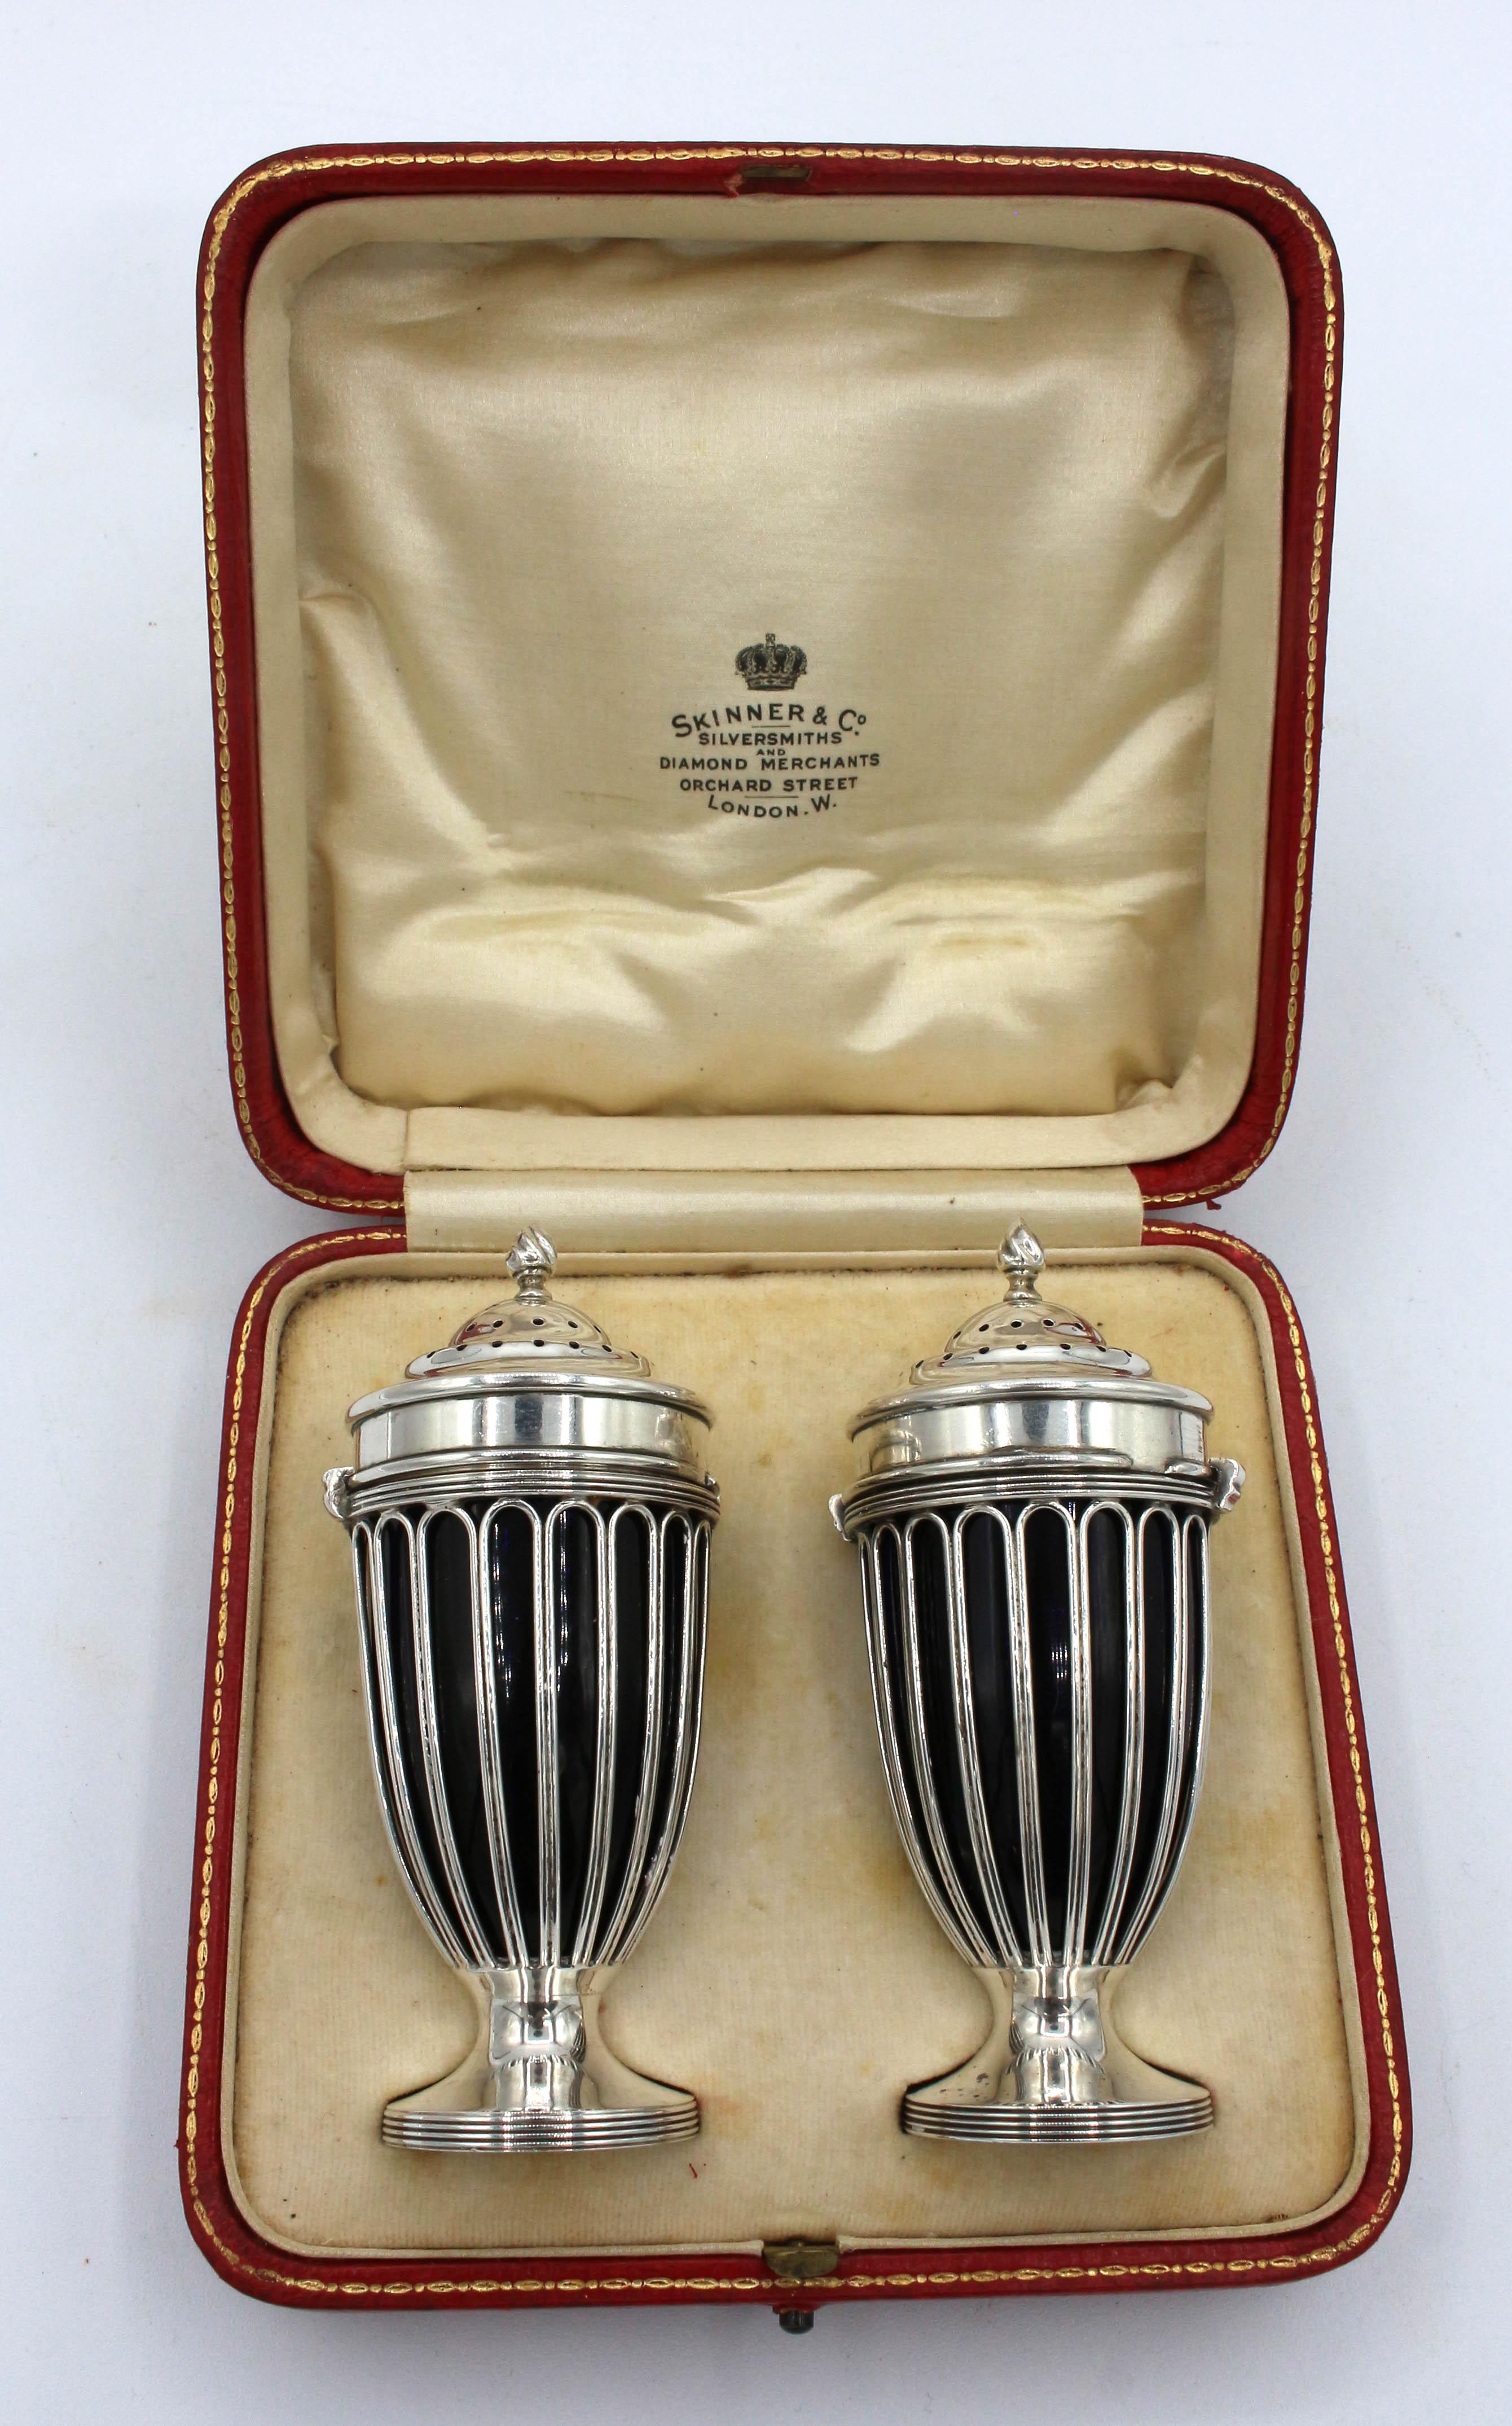 London, 1910, sterling silver pair of salt & pepper casters. Cobalt glass lined. Neoclassical taste with twist flame finials. Made by Edward John Haseler & Noble Haseler. Original scarlet & gilt, satin lined case for presentation from Skinner & Co,